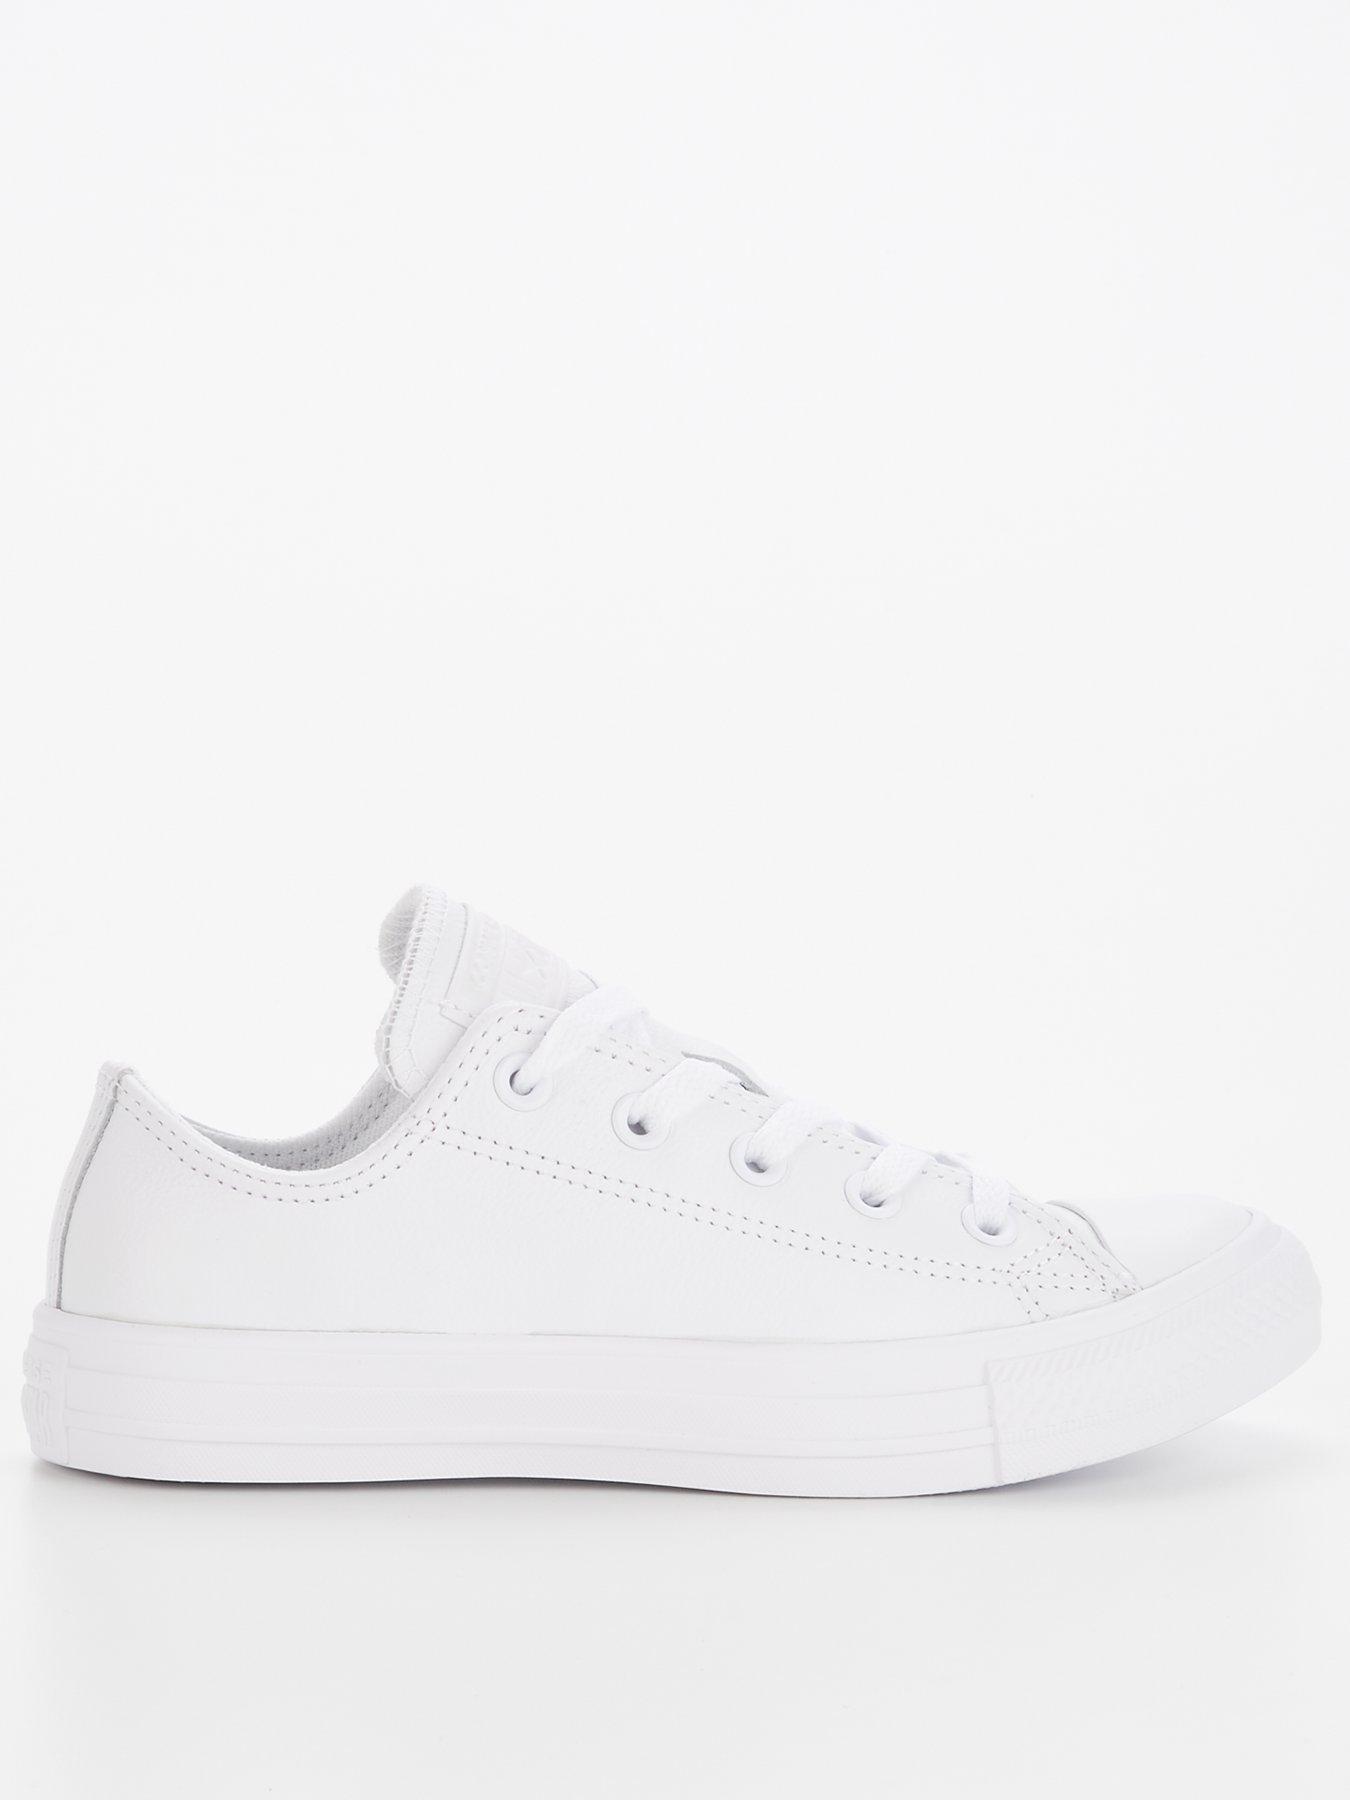 all white converse shoes